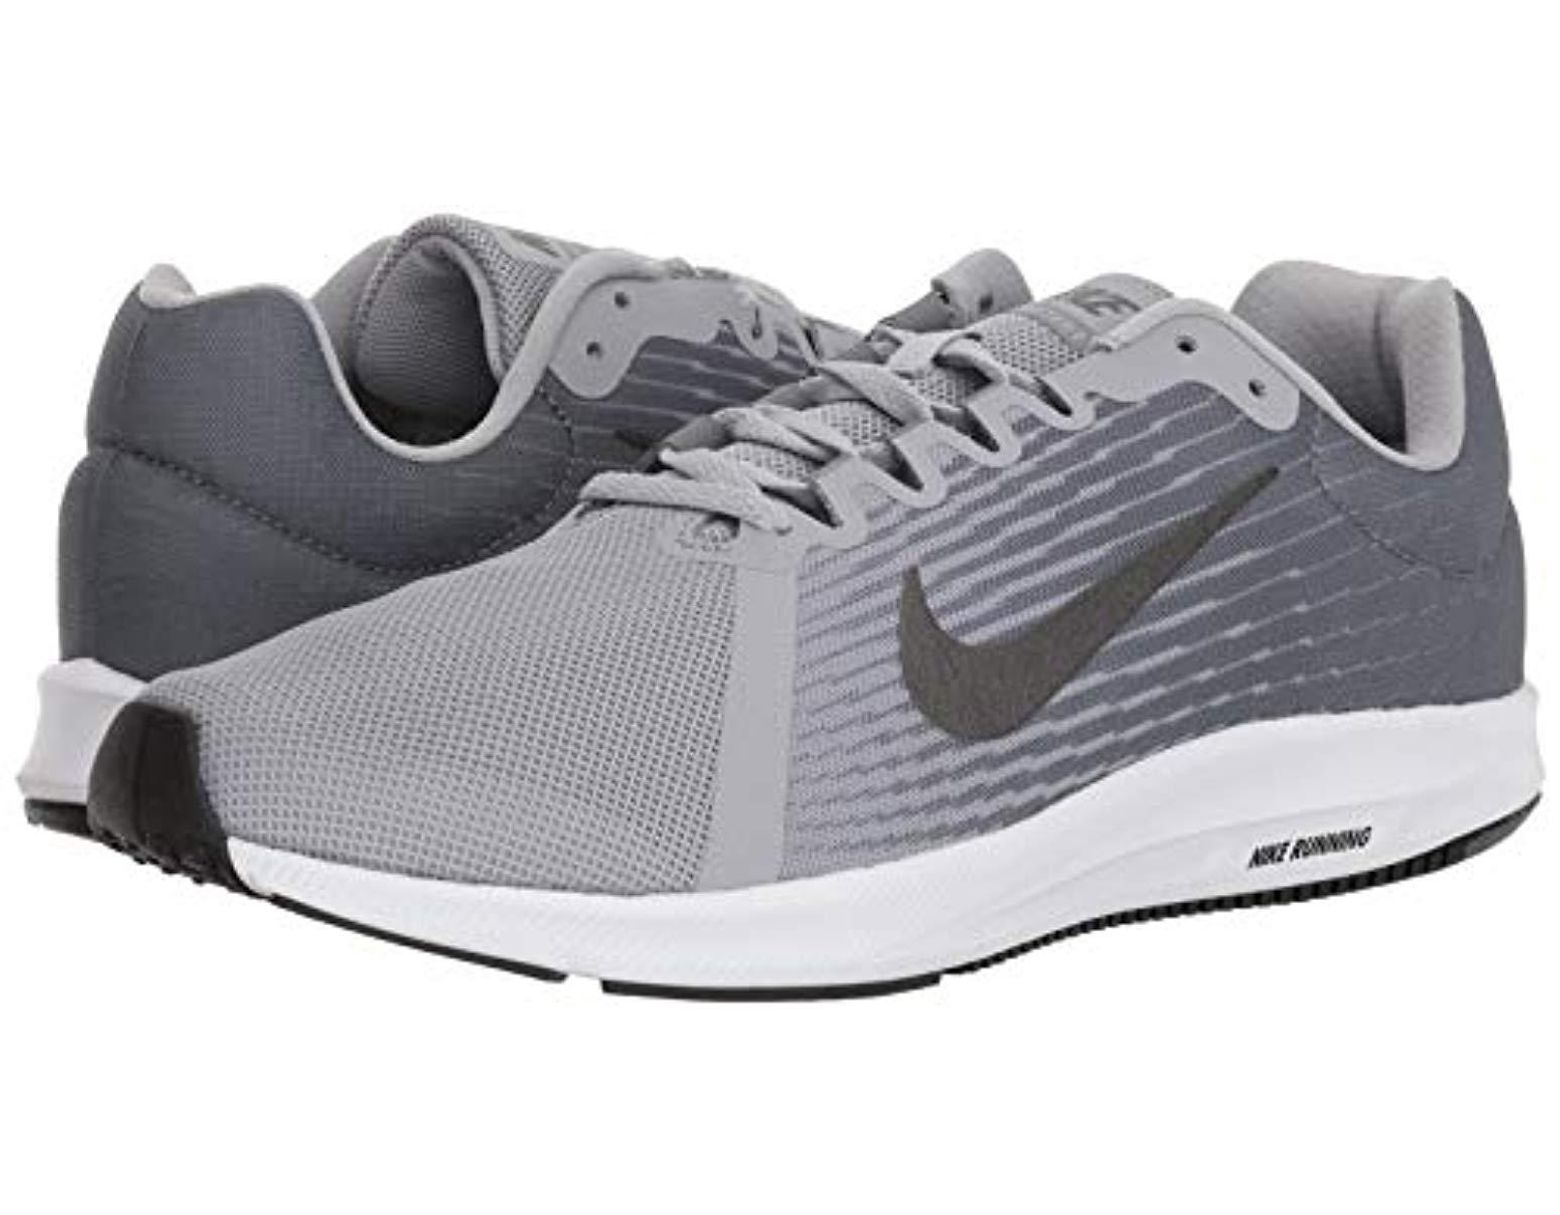 Nike Mens Downshifter 8 Extra Wide 4E 